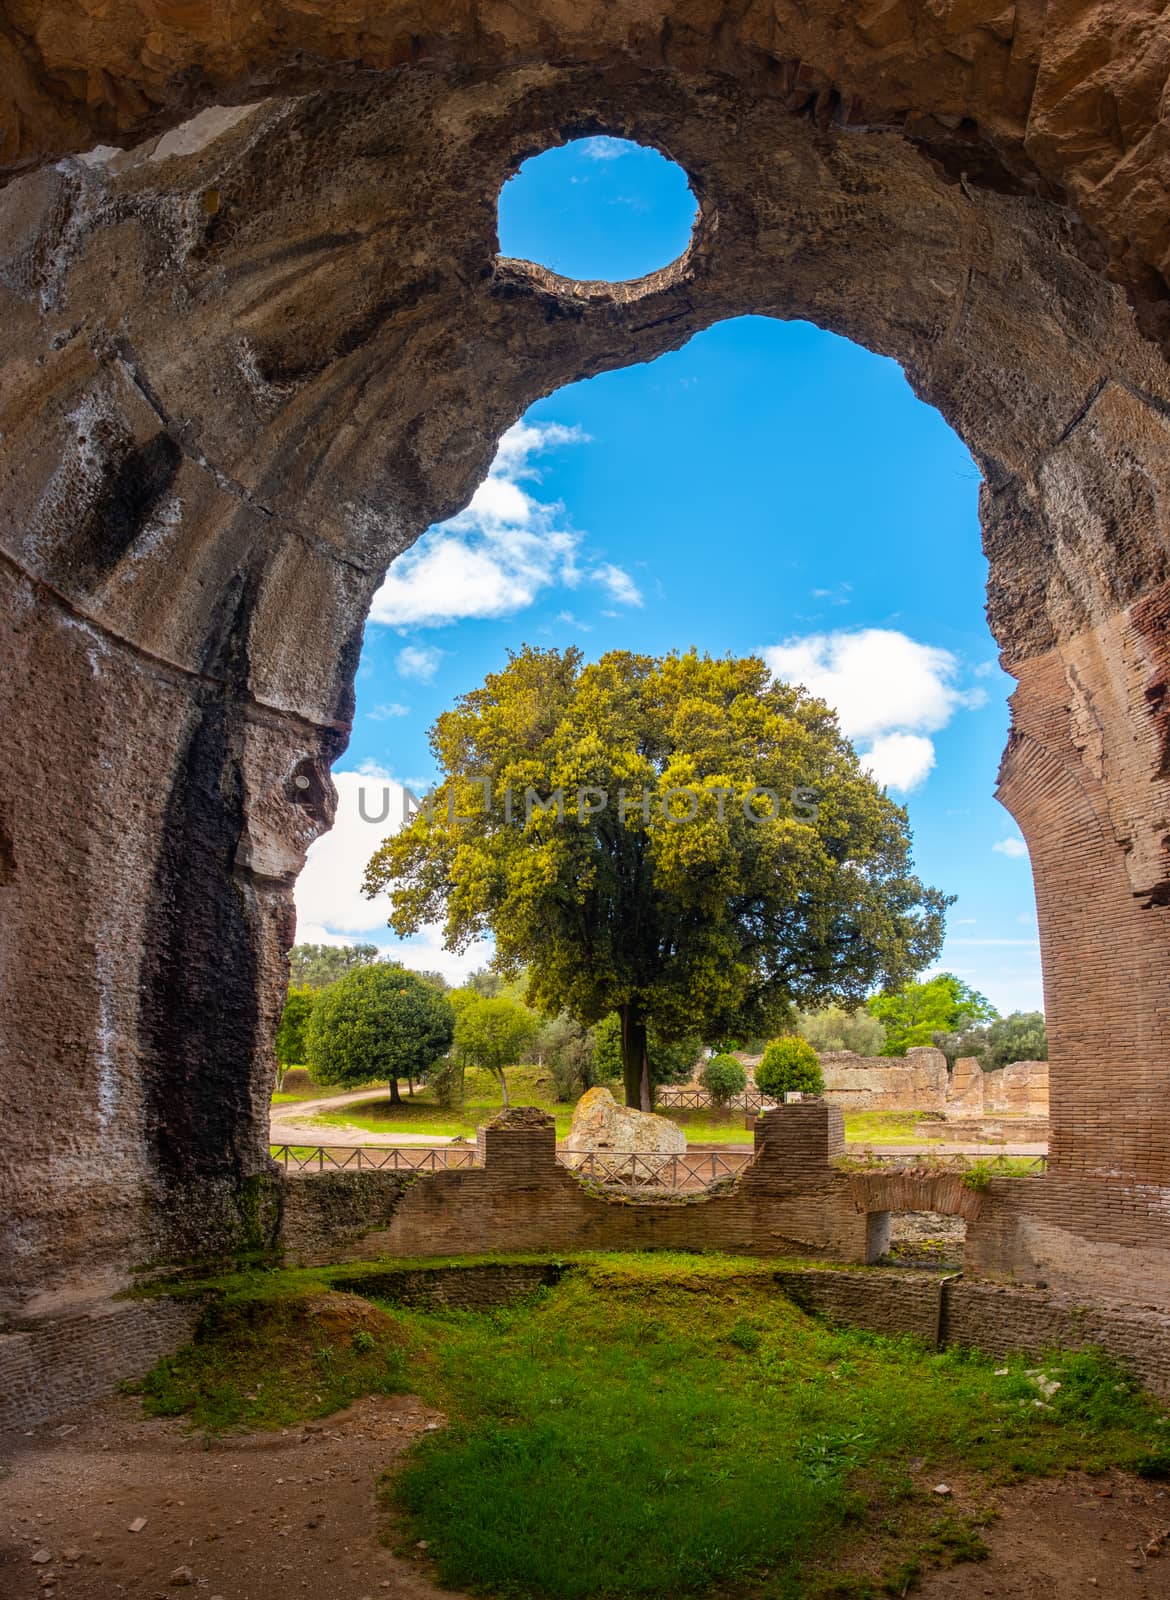 Villa Adriana - Rome Tivoli - Italy -  large tree seen through  large chasm on walls of ancient Roman palace with  circle-shaped hole on ceiling by LucaLorenzelli